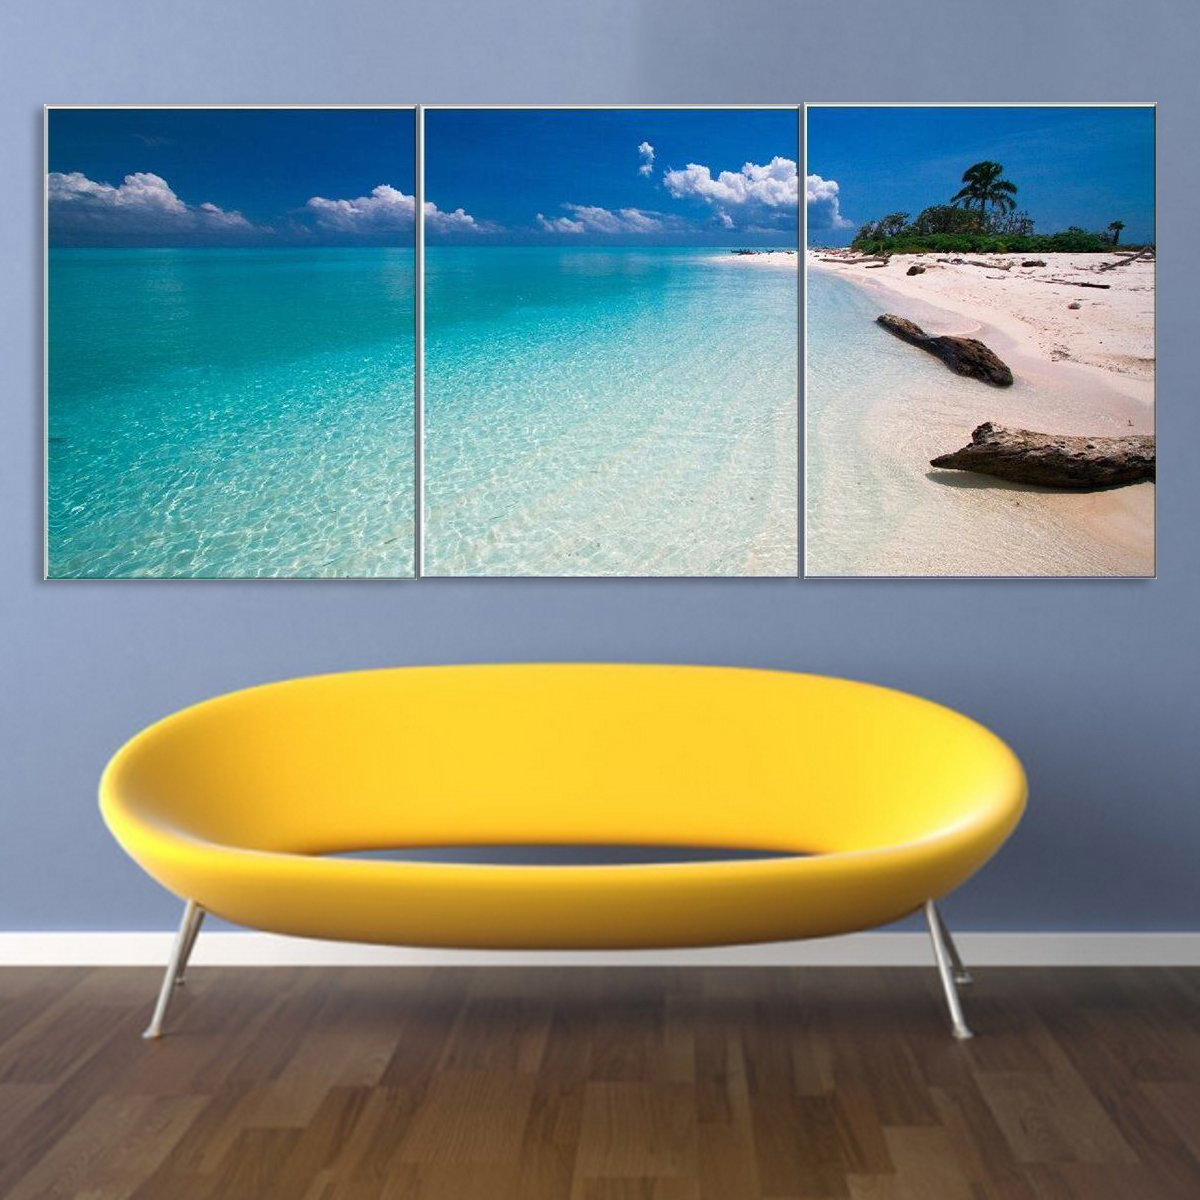 3Pcs-Canvas-Print-Paintings-Beach-Seaside-Wall-Decorative-Print-Art-Pictures-Frameless-Wall-Hanging--1159414-6